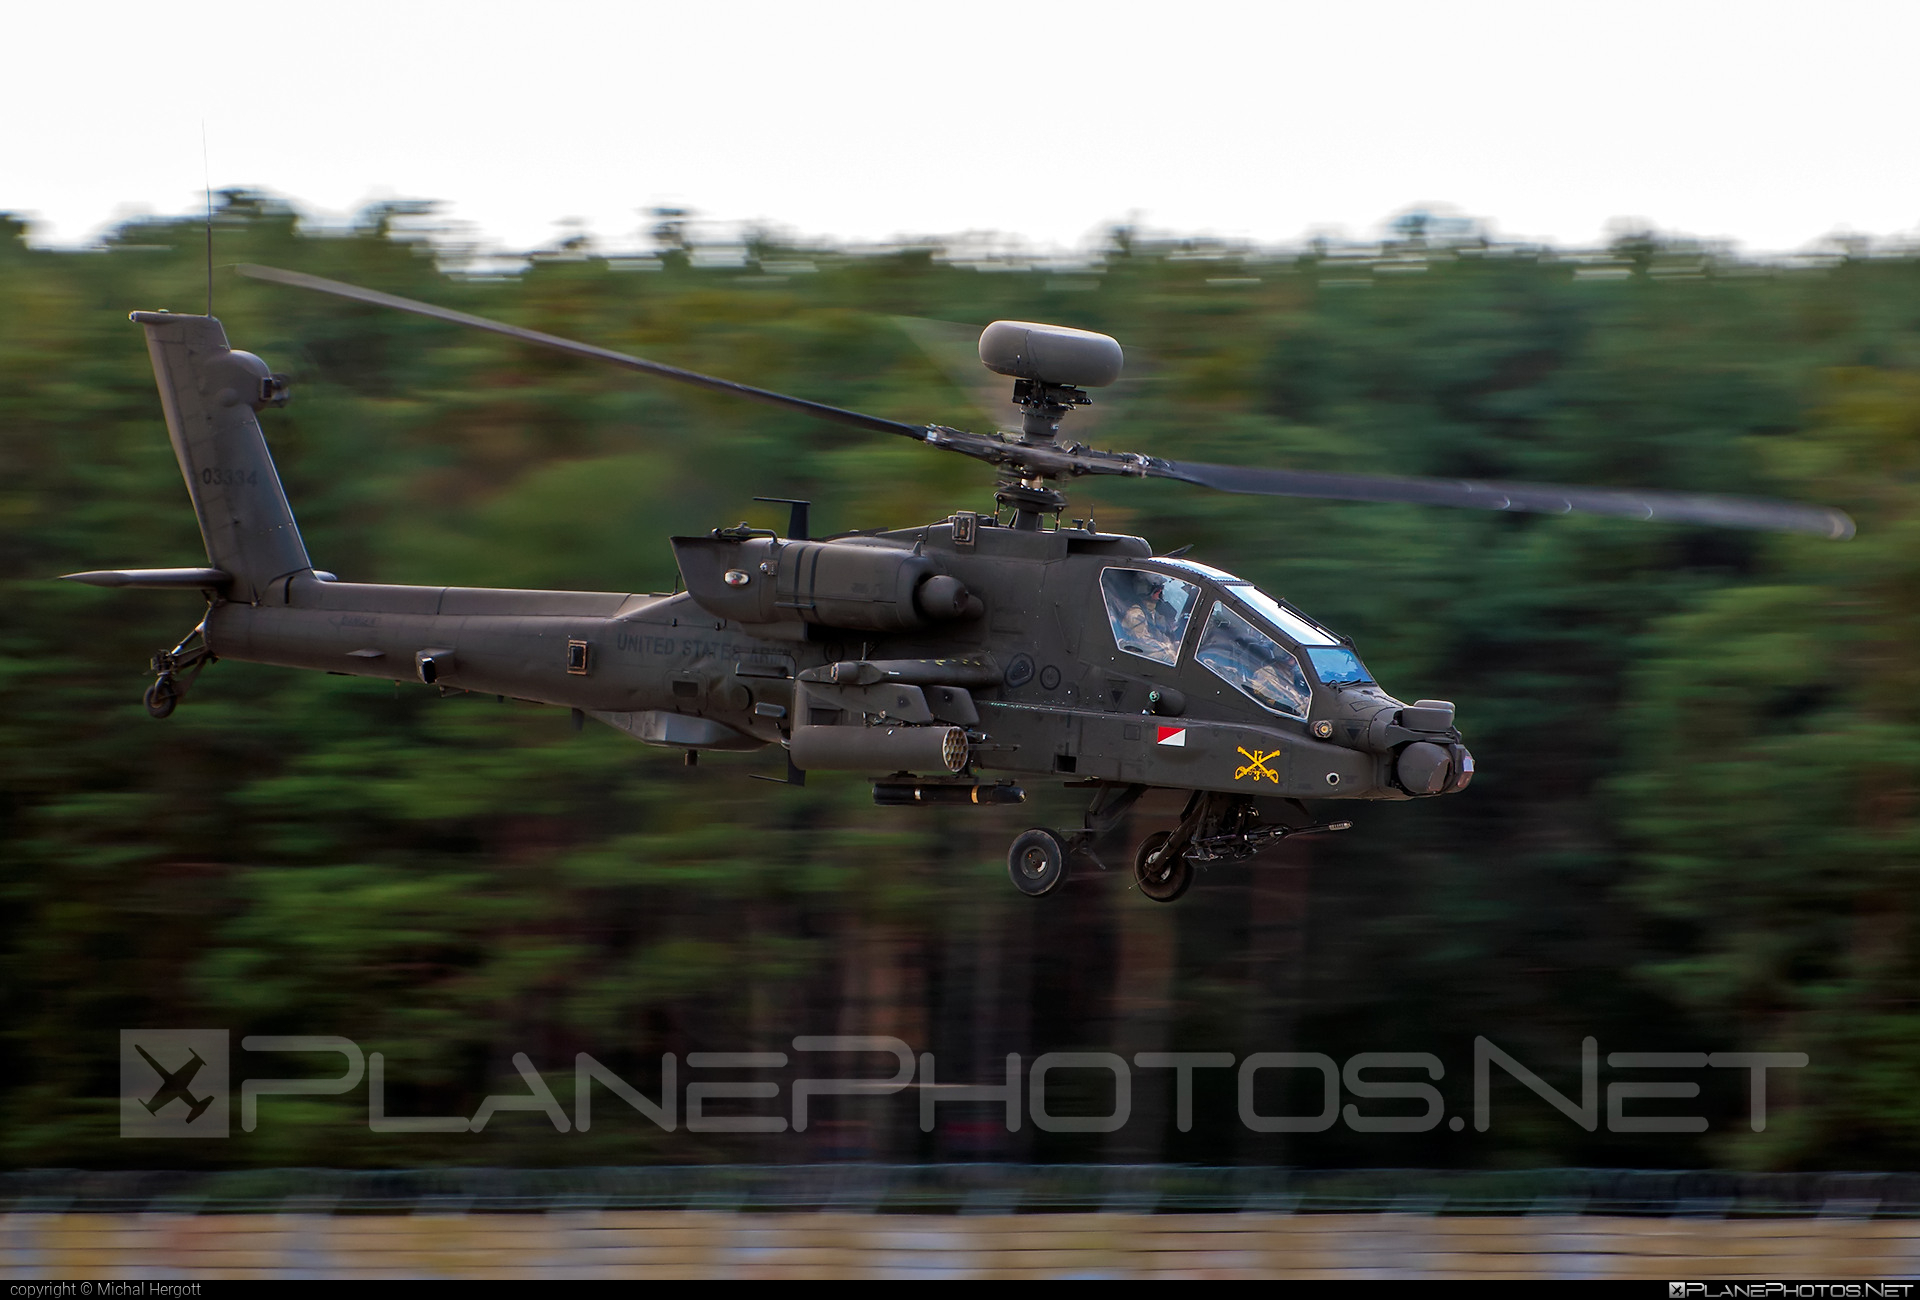 Boeing AH-64E Apache Guardian - 20-03334 operated by US Army #ah64 #ah64apache #ah64e #ah64eapache #ah64eapacheguardian #apacheguardian #boeing #usarmy